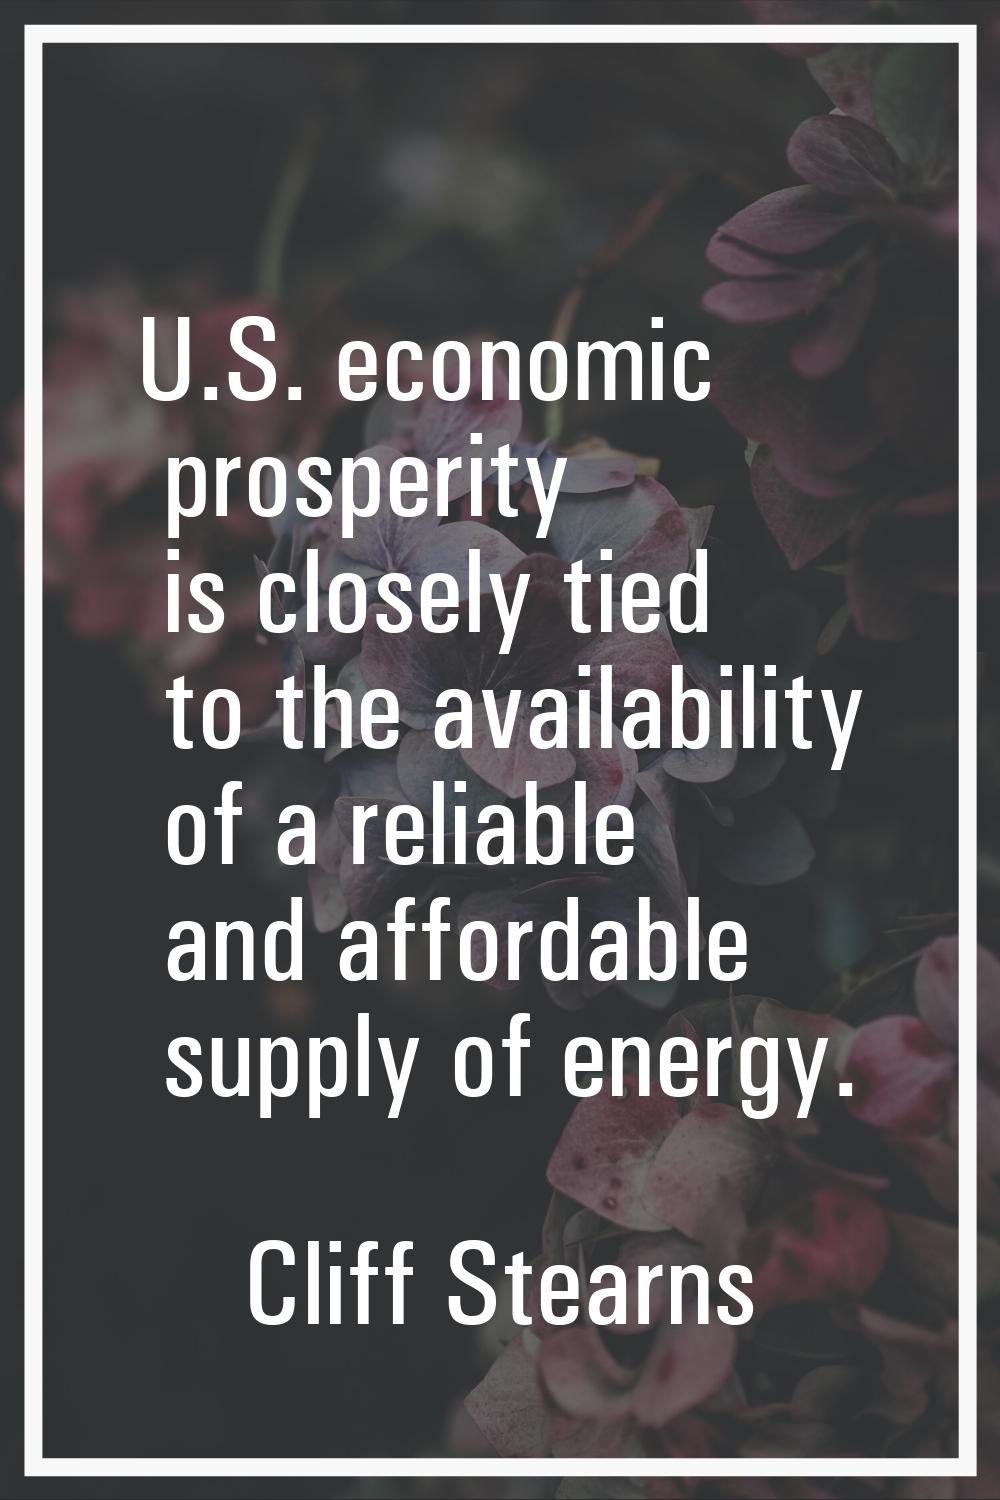 U.S. economic prosperity is closely tied to the availability of a reliable and affordable supply of